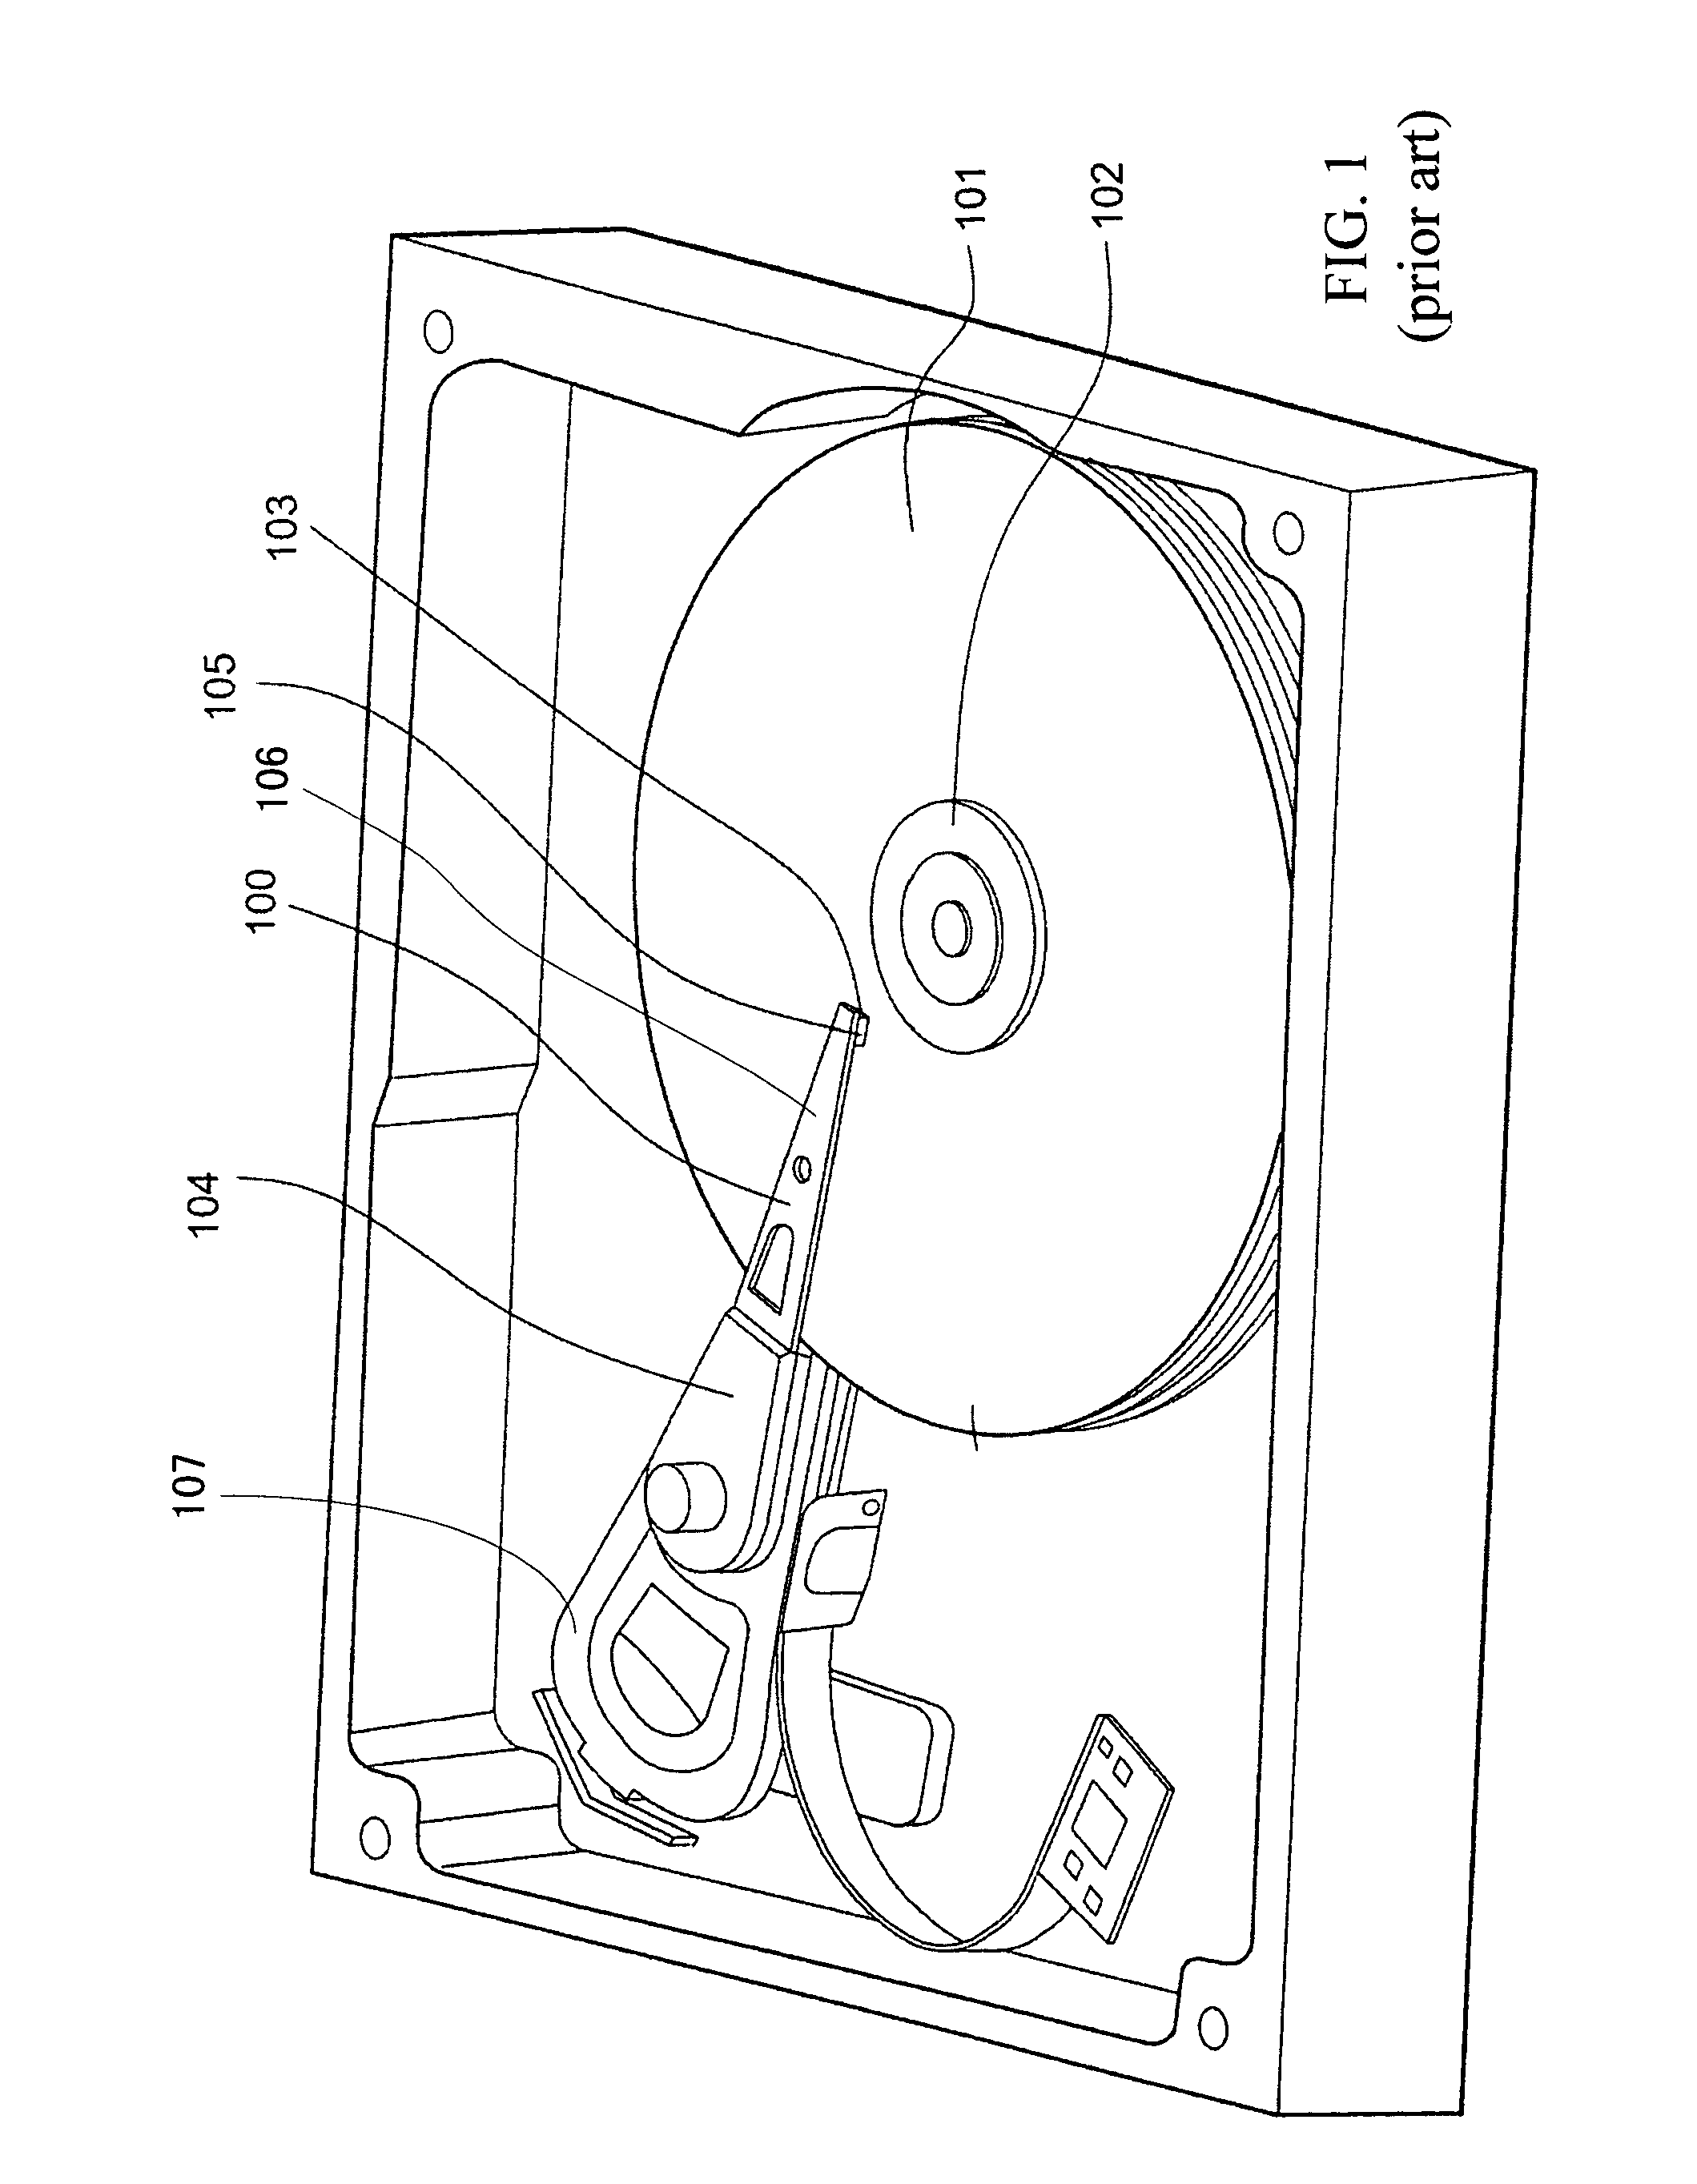 Disk drive head gimbal assembly including a PZT micro-actuator with a pair of separate PZT elements